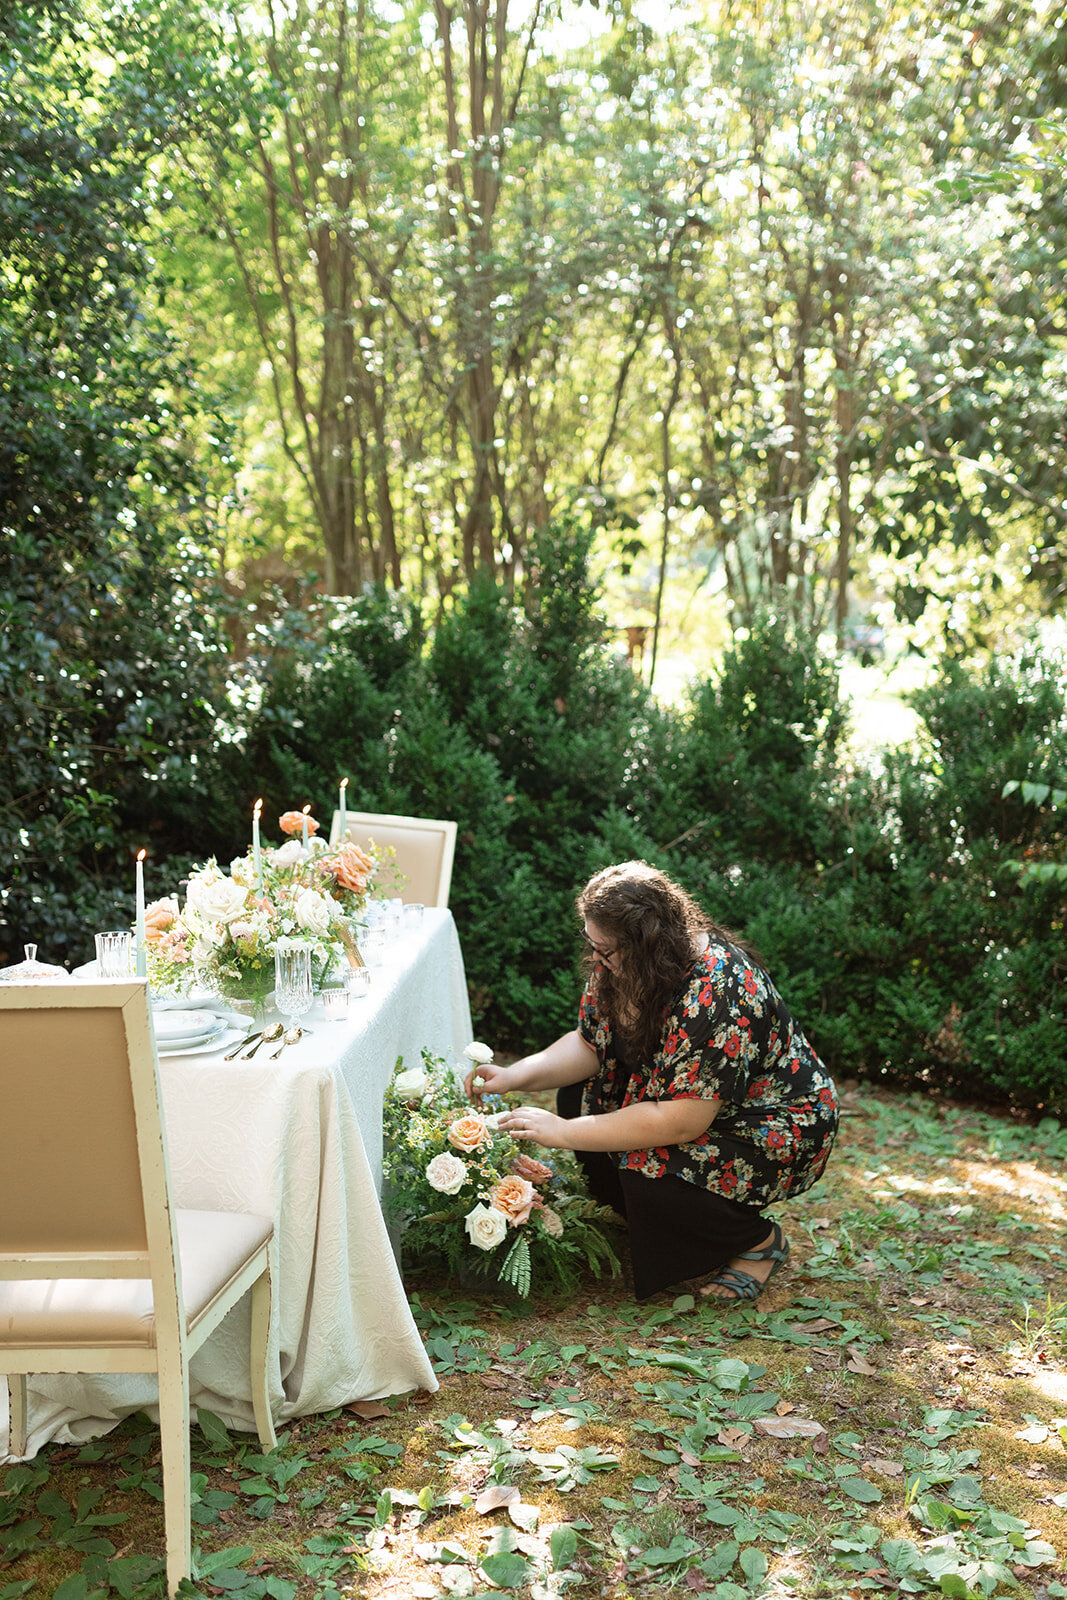 J+J-July 22 Styled Shoot-Maggie Dunn Photography-44